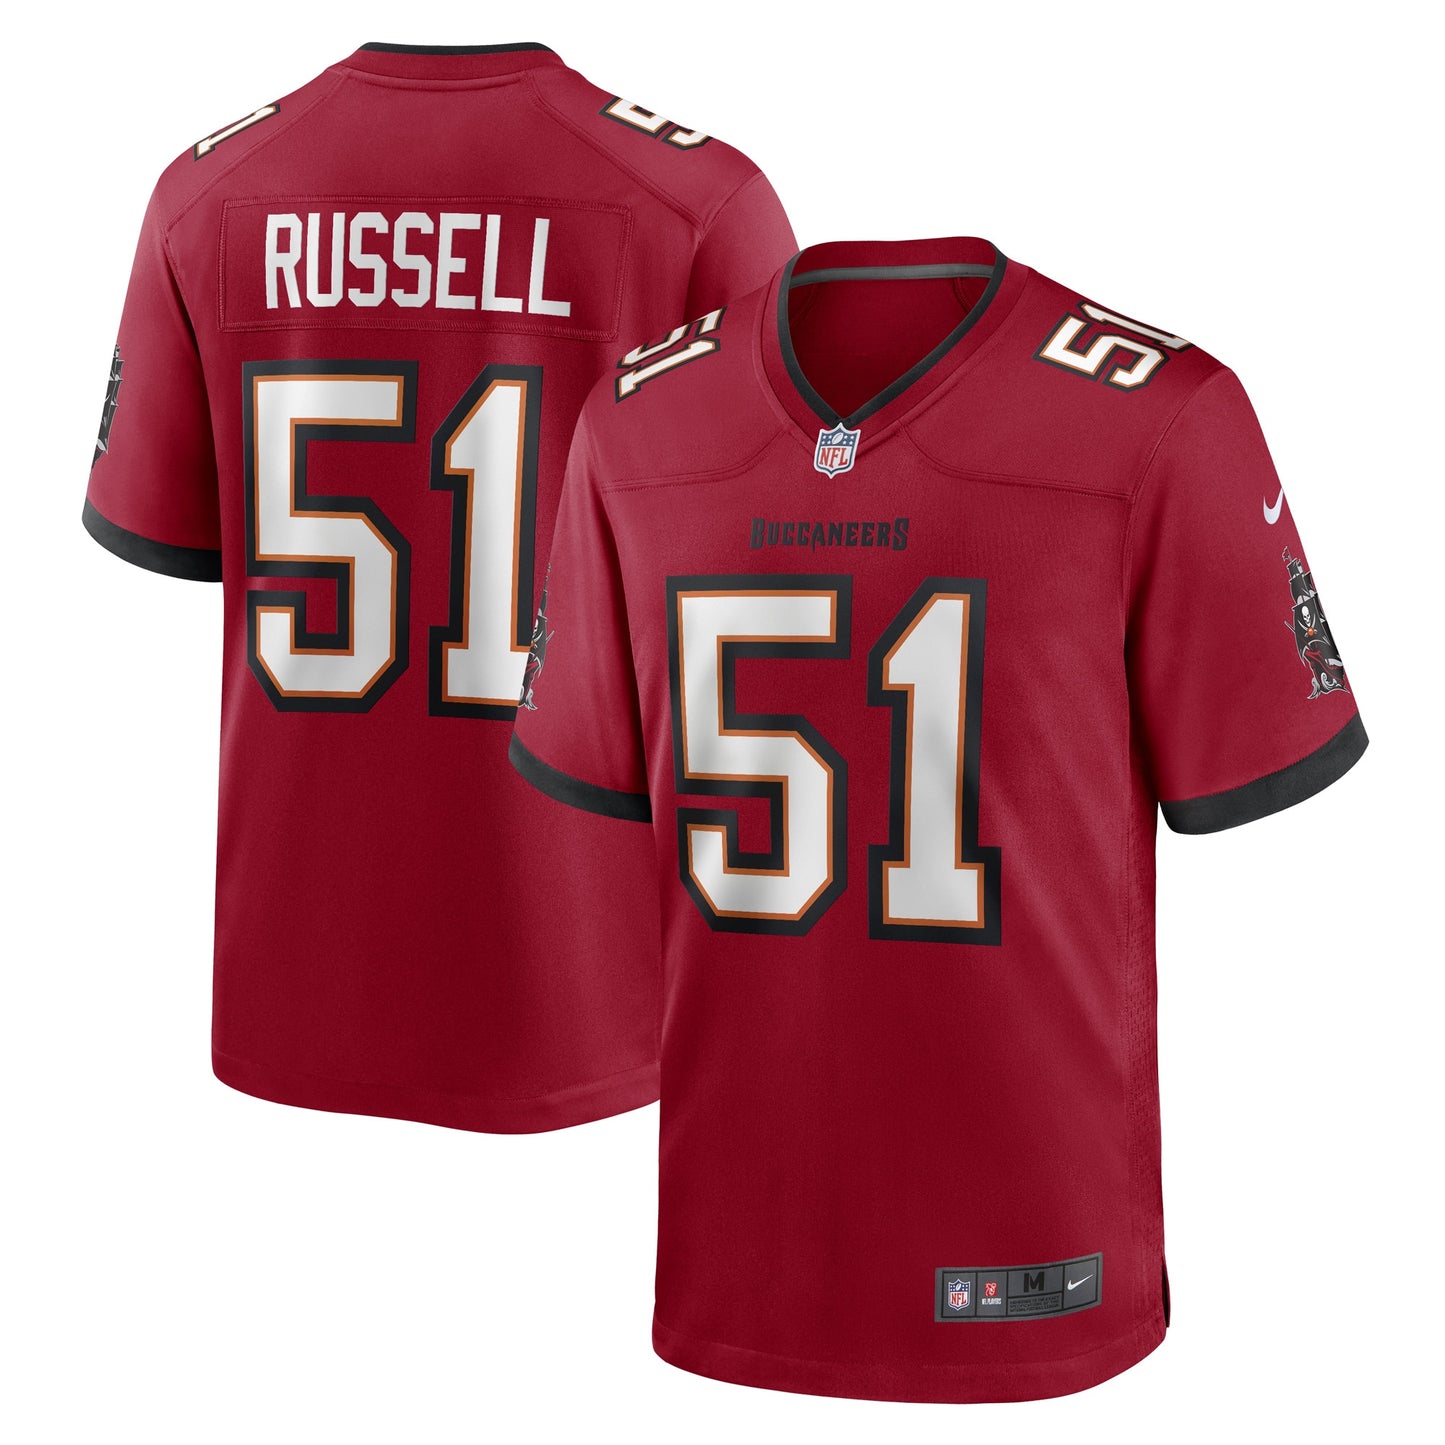 J.J. Russell Tampa Bay Buccaneers Nike Game Player Jersey - Red